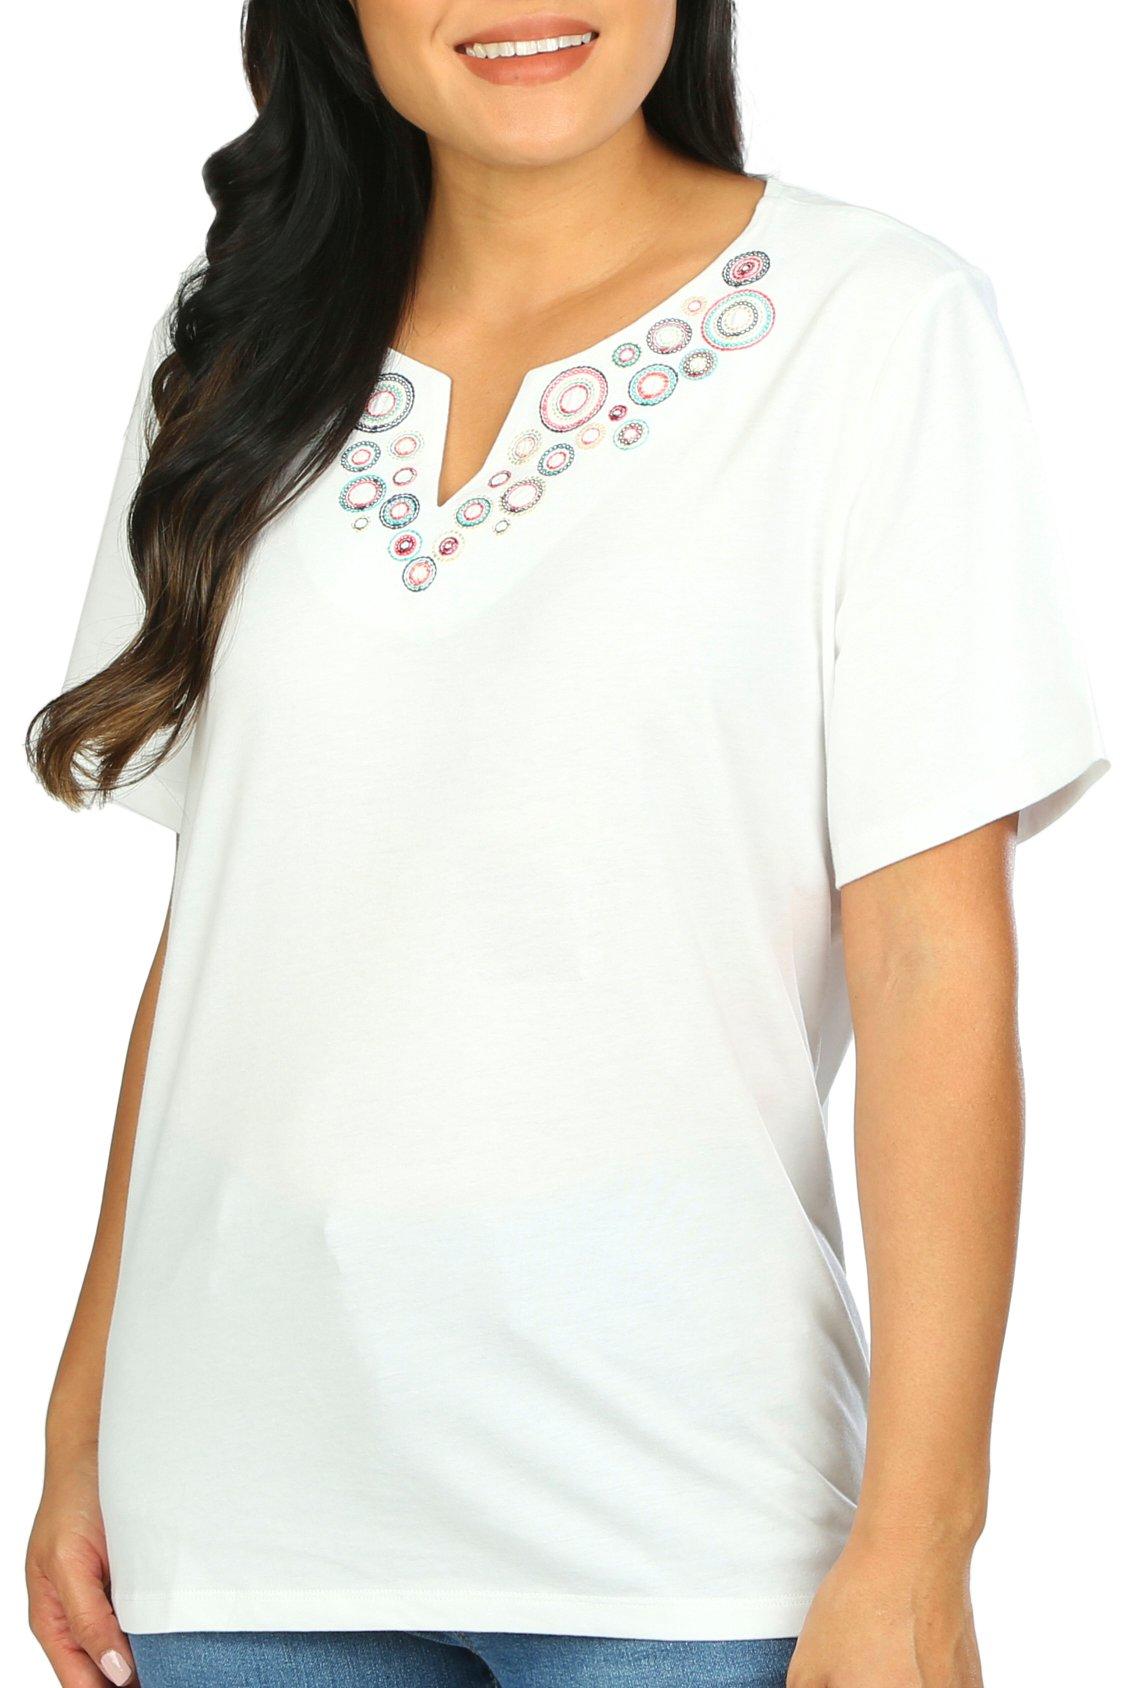 Coral Bay Womens Embroidered Notch Neckline Short Sleeve Tee